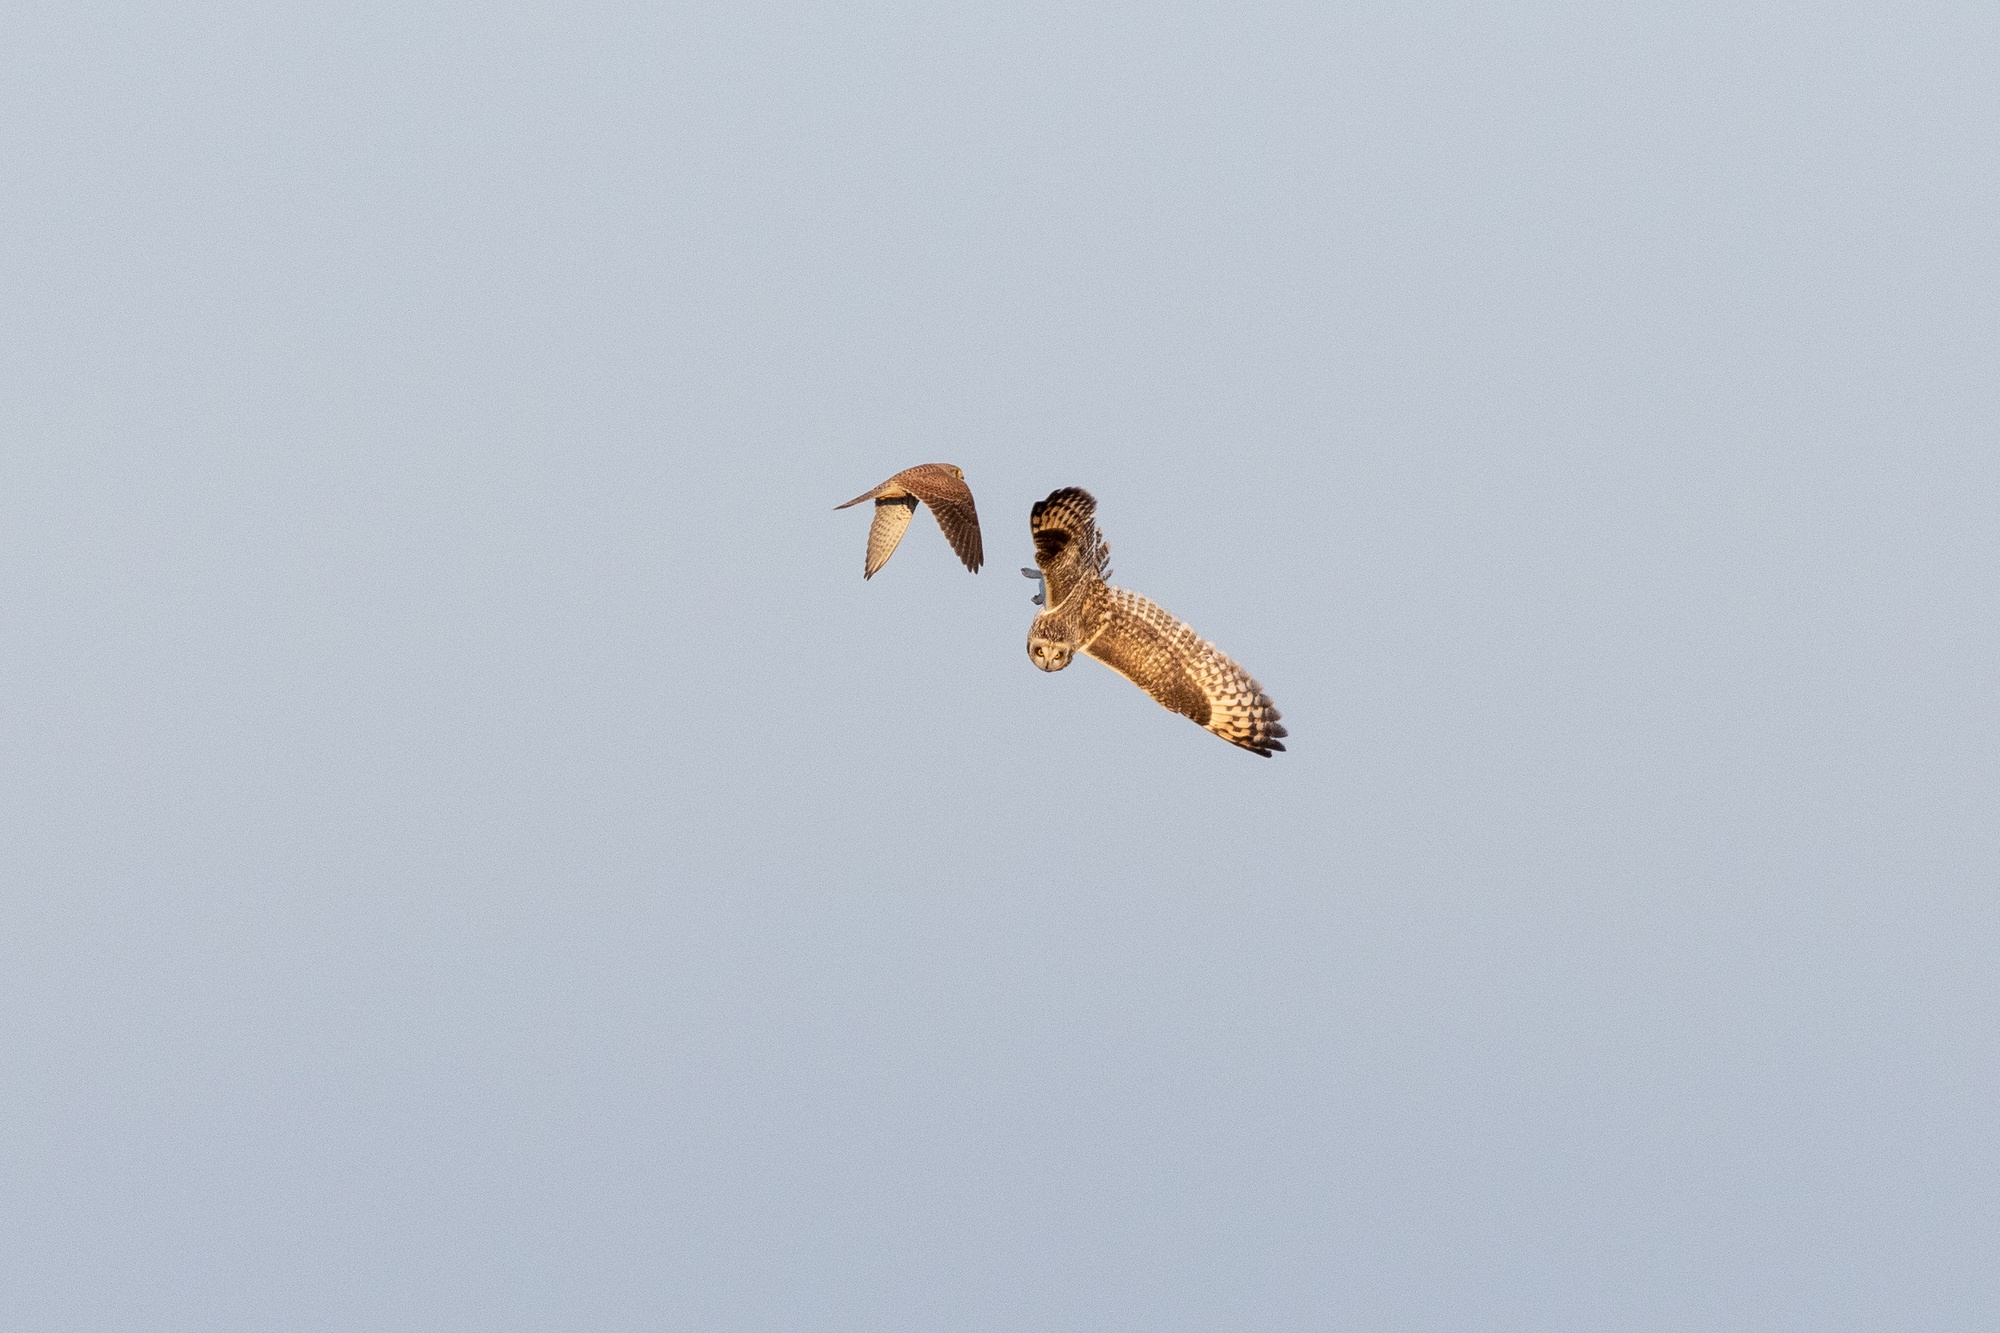 There is a kestrel to left of the center of the frame. It is flying away from the camera towards the owl to it's right. It's wings are towards the bottom of their swing. The owl to it's right is is pointing downwards with its underside towards the kestrel. The owls wings are towards the top of their swing and its closed feet are pointing towards the kestrel. The owl is facing directly downwards. The birds appear less than a foot apart. The background is a blueish sky.